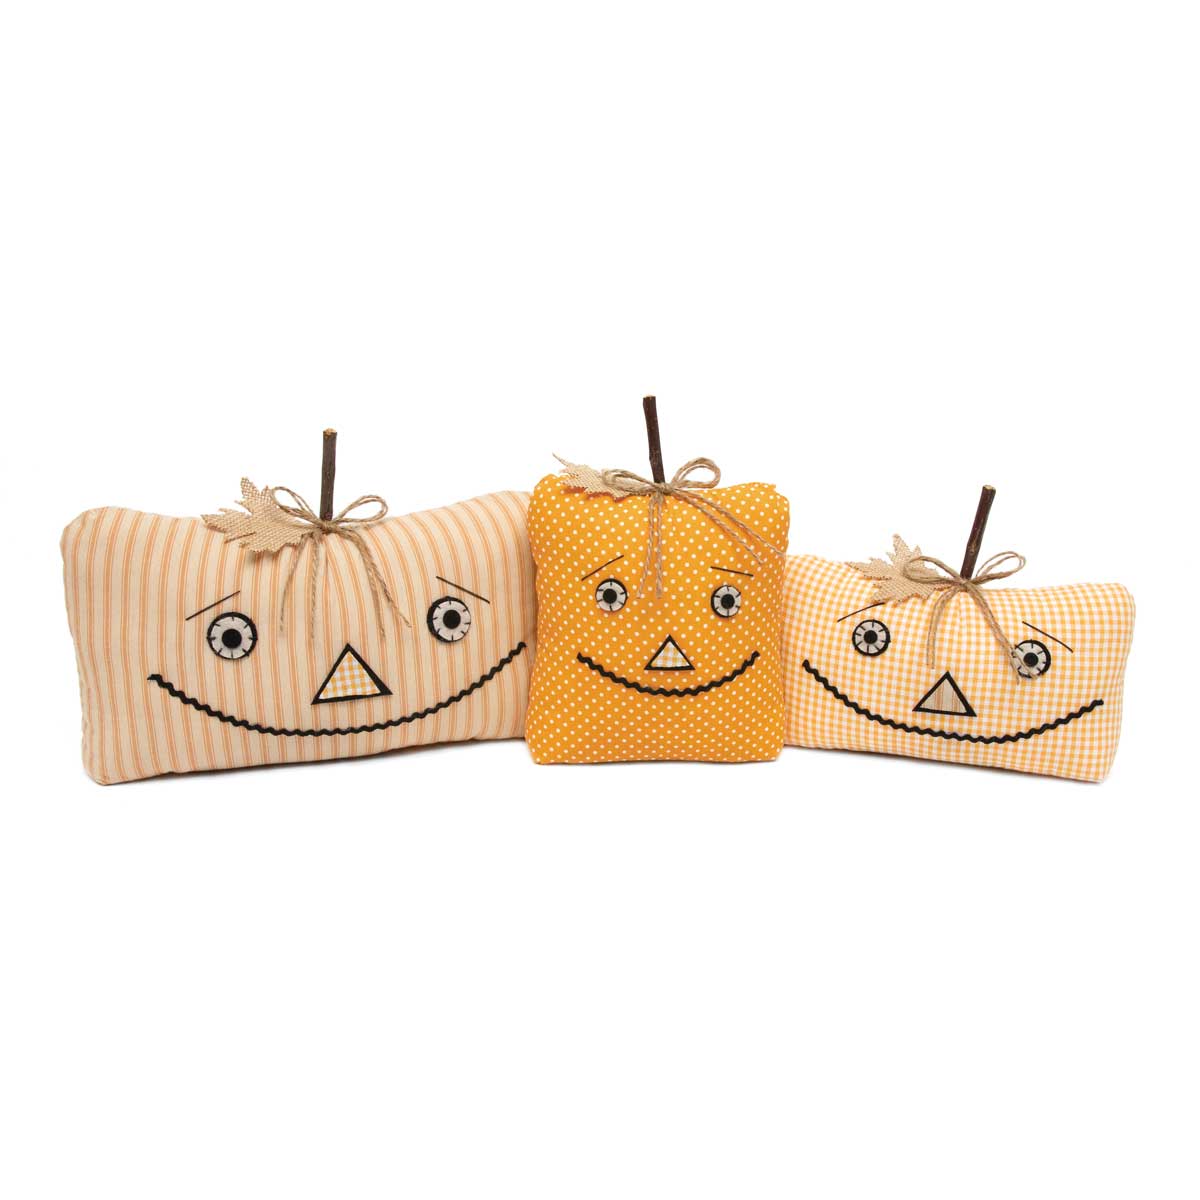 PILLOW PUMPKIN FACE SQUARE 7IN X 3.5IN X 7IN MUSTARD/WHITE - Click Image to Close